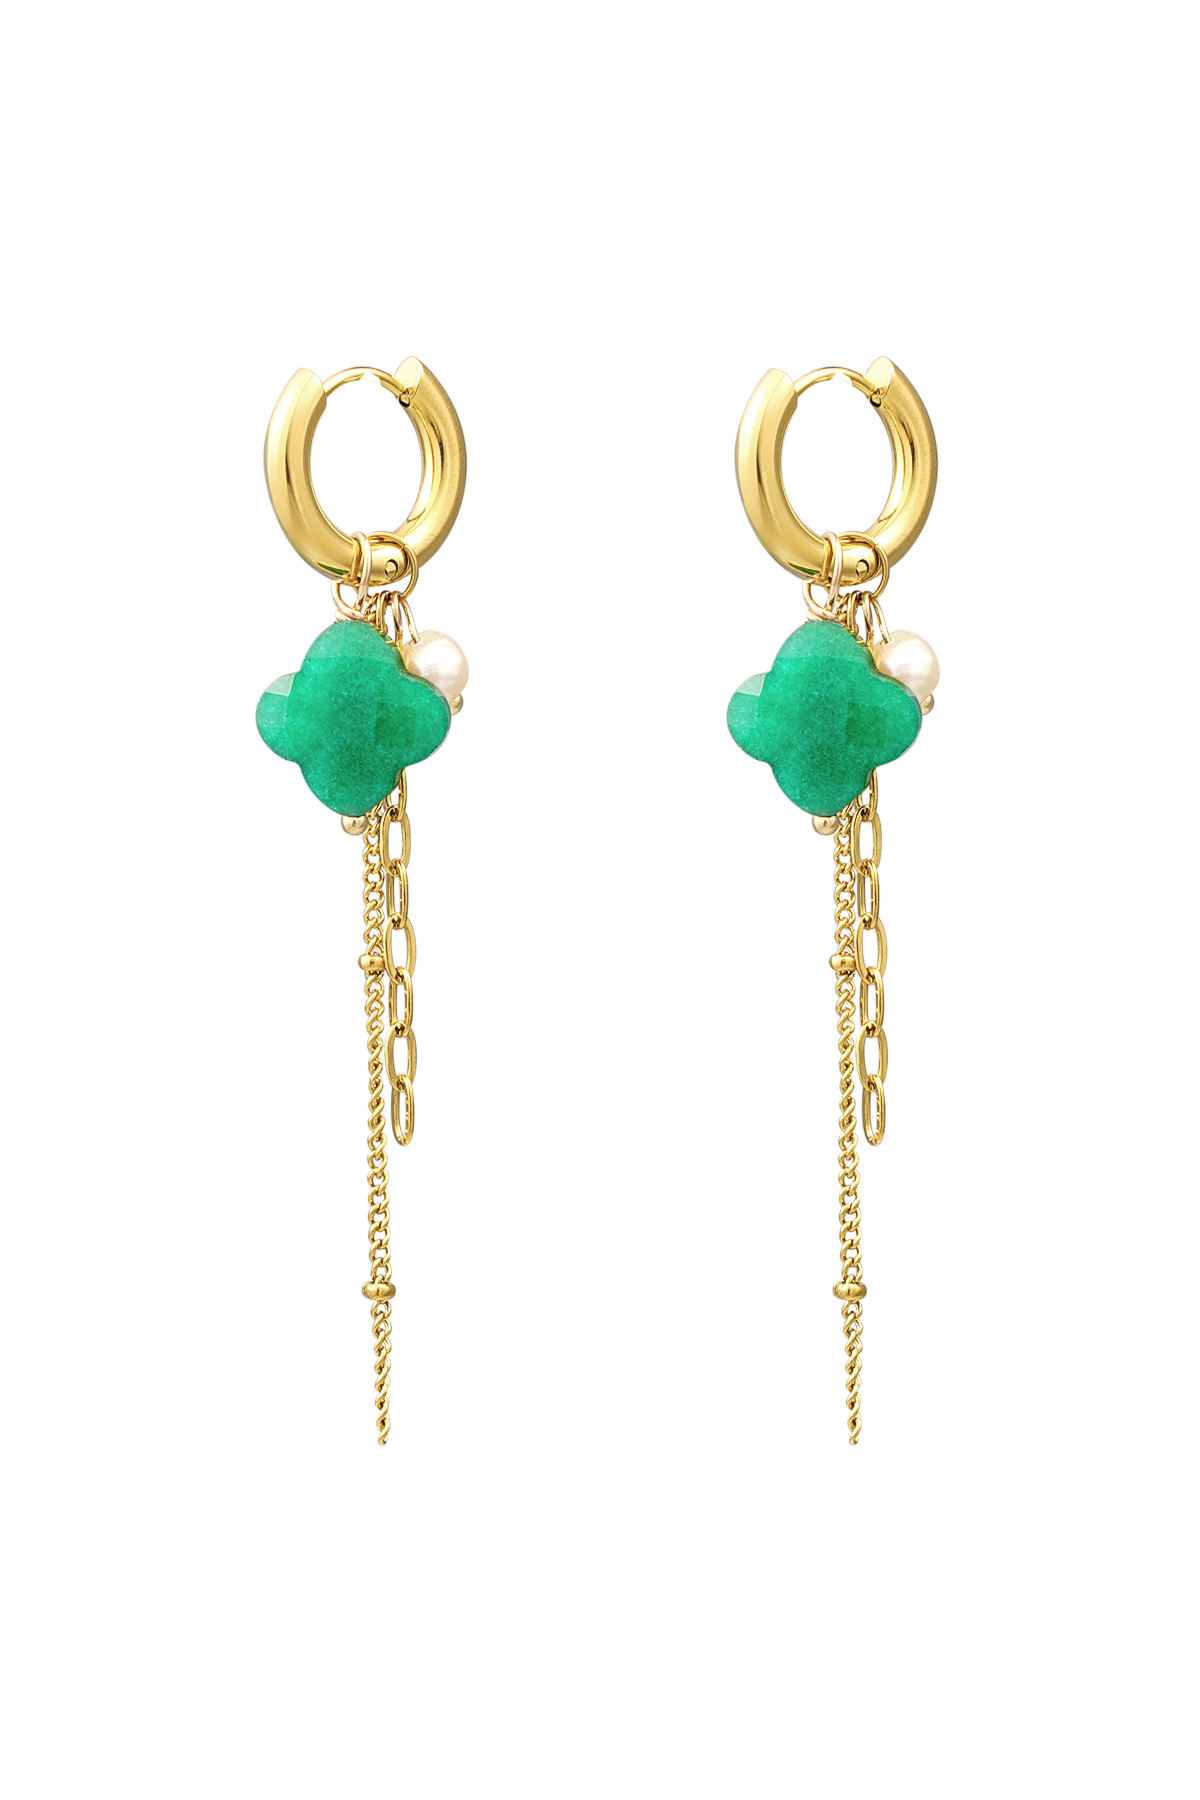 Clover earrings with chains - gold/green h5 